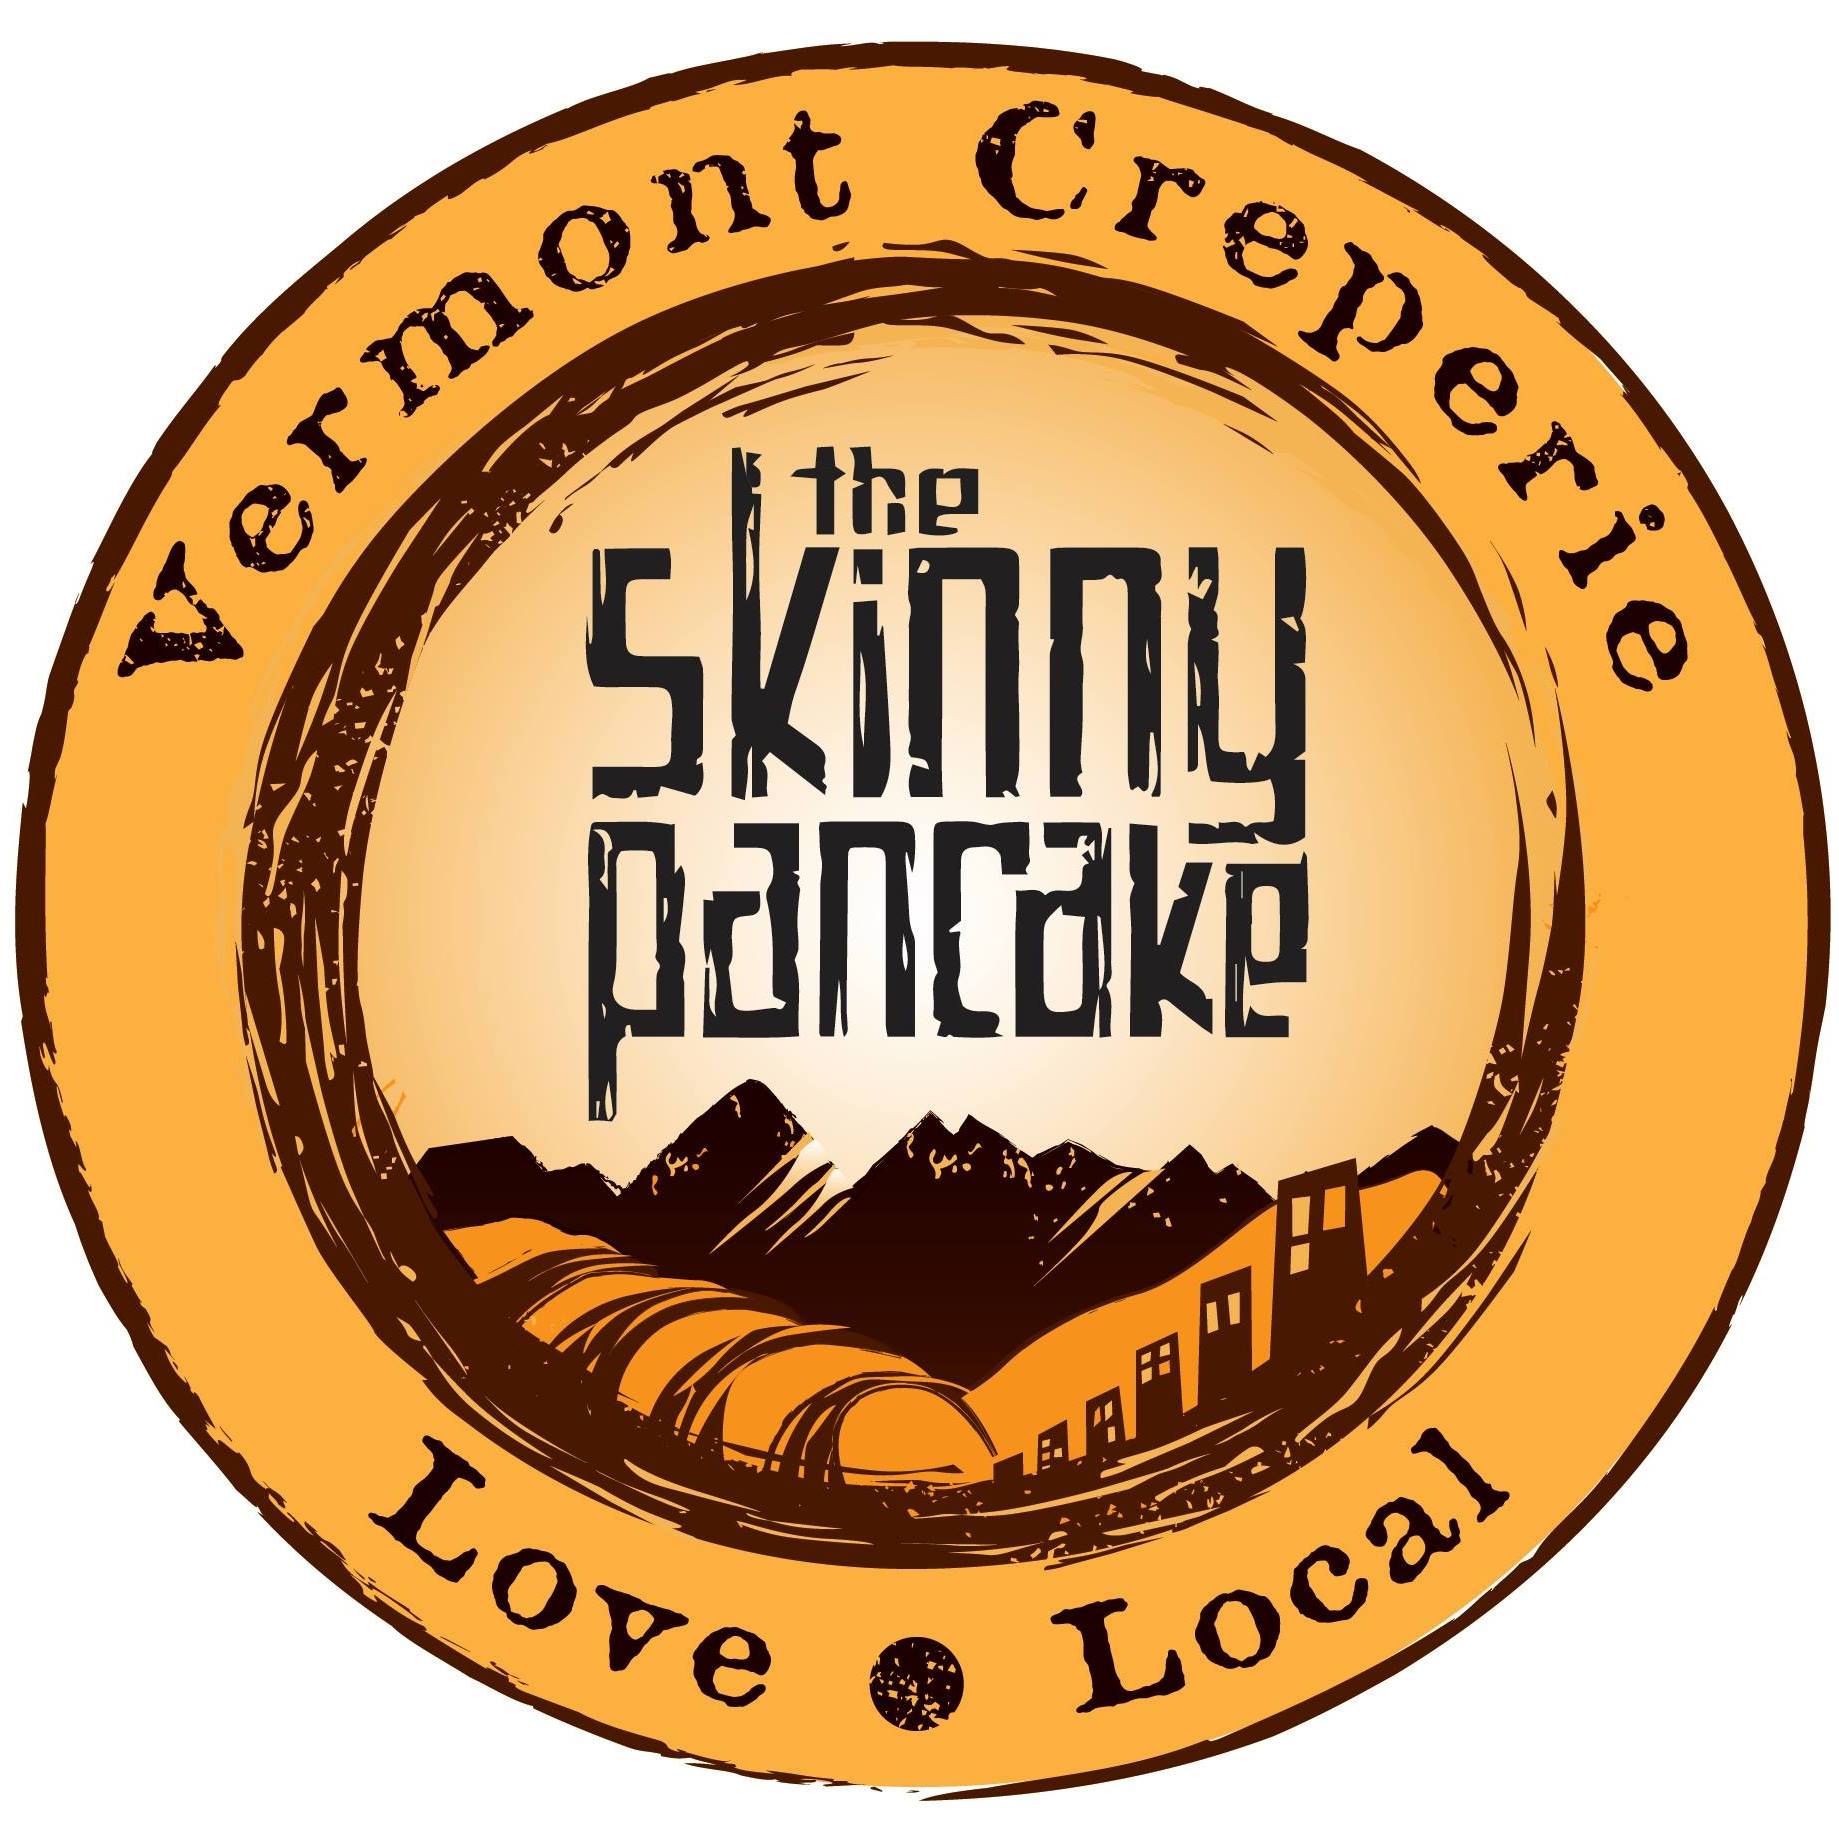 A logo for The Skinny Pancake. A circle with a light brown outer circle reads "Vermont Creperie, Love Local". An inner circle outlined in darker brown reads "the Skinny Pancake" with two loaves of bread in the lower portion of the circle.